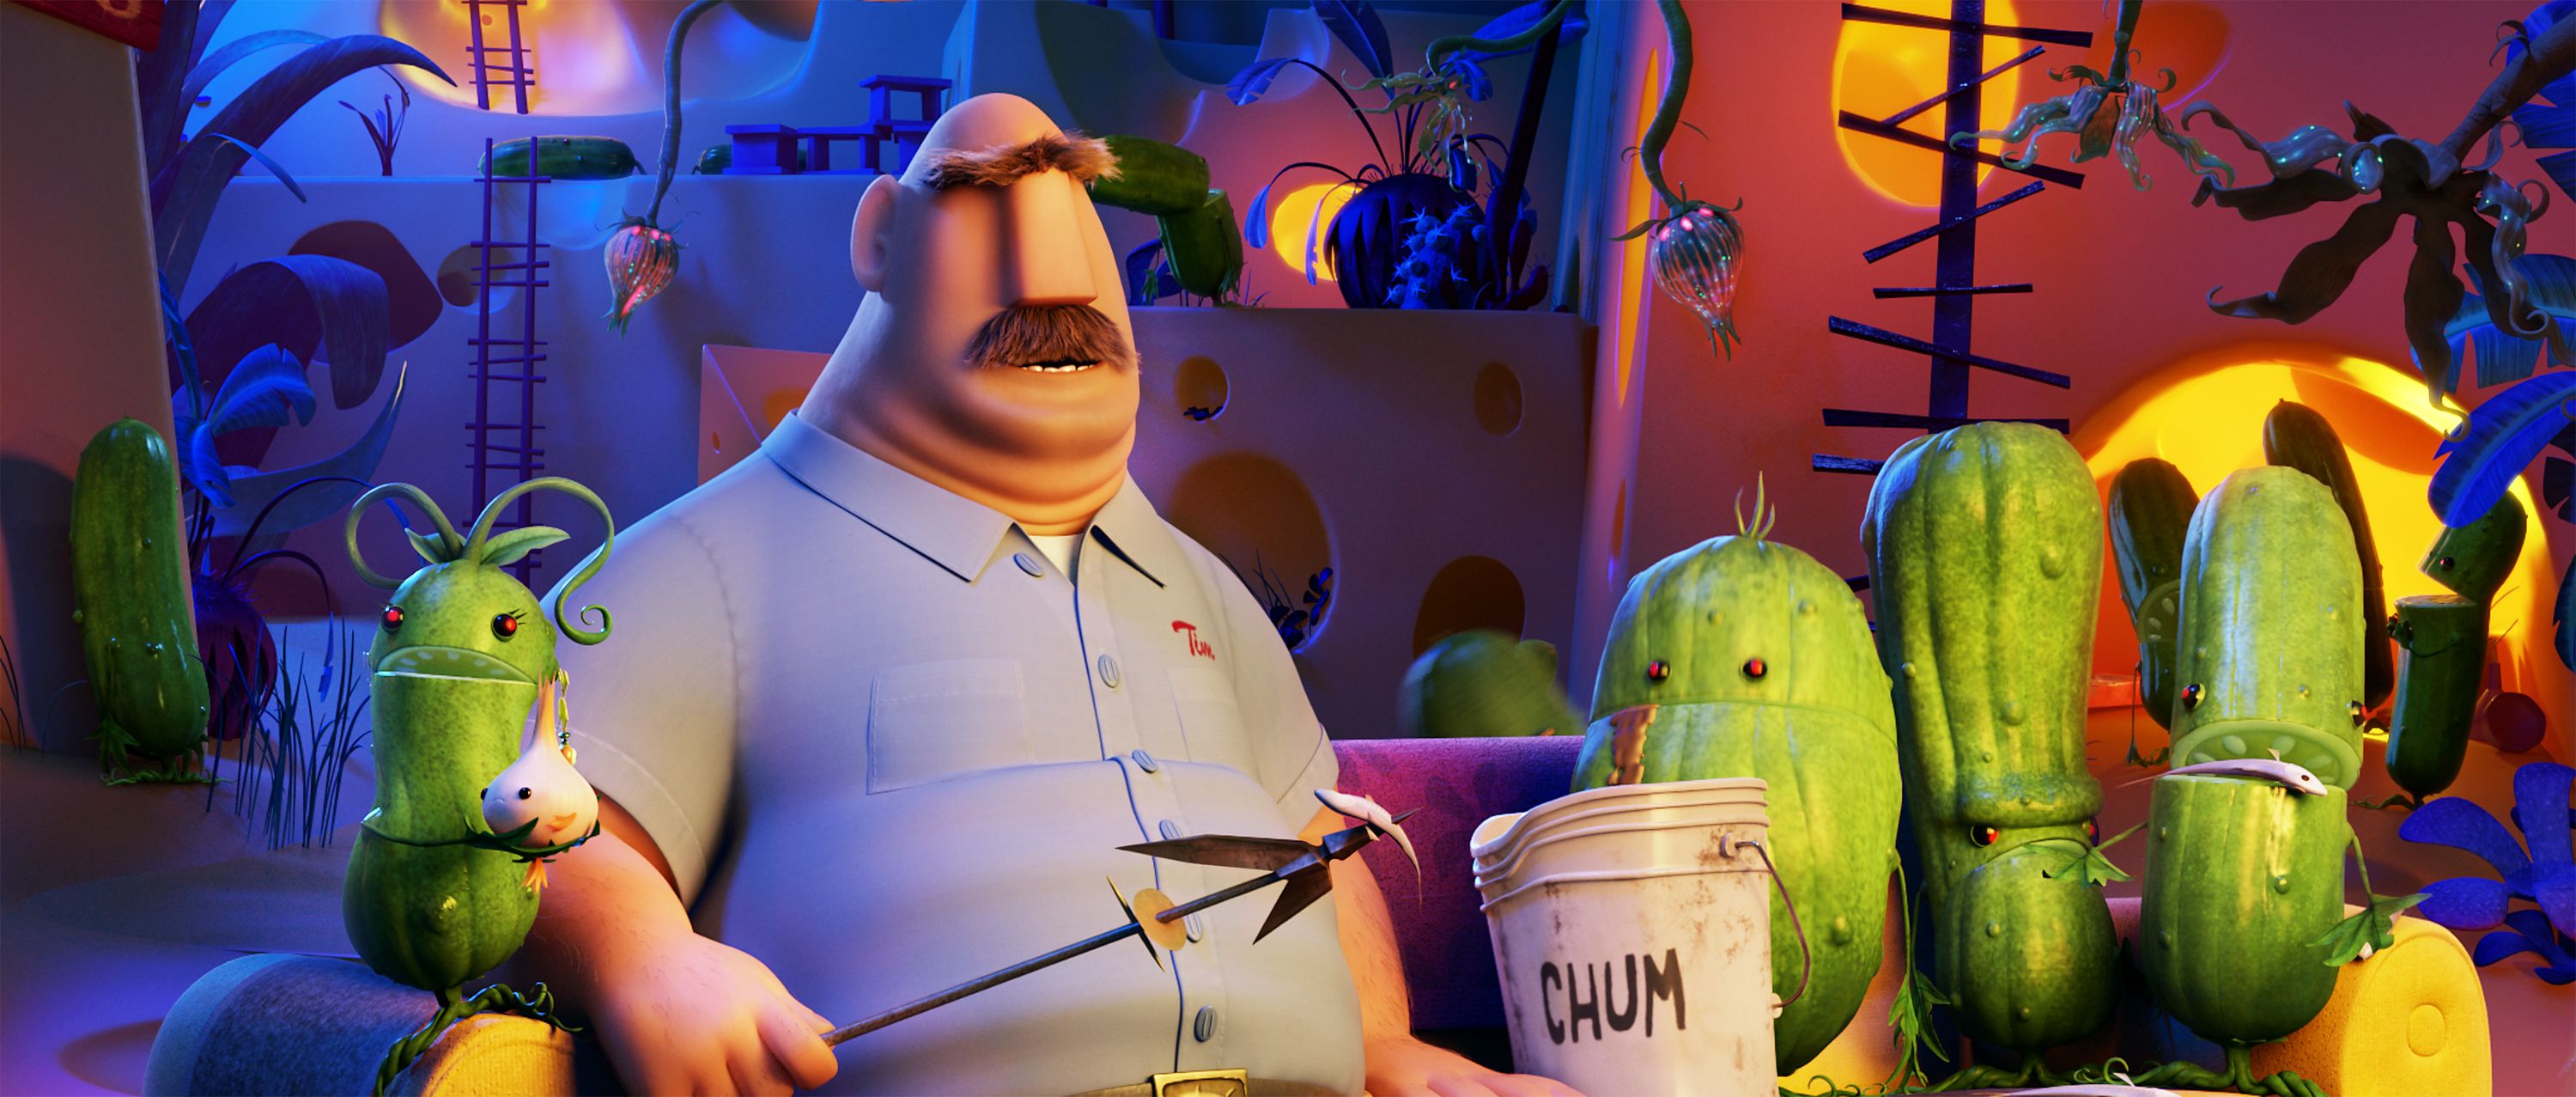 Cloudy with a Chance of Meatballs 2 Photo 5